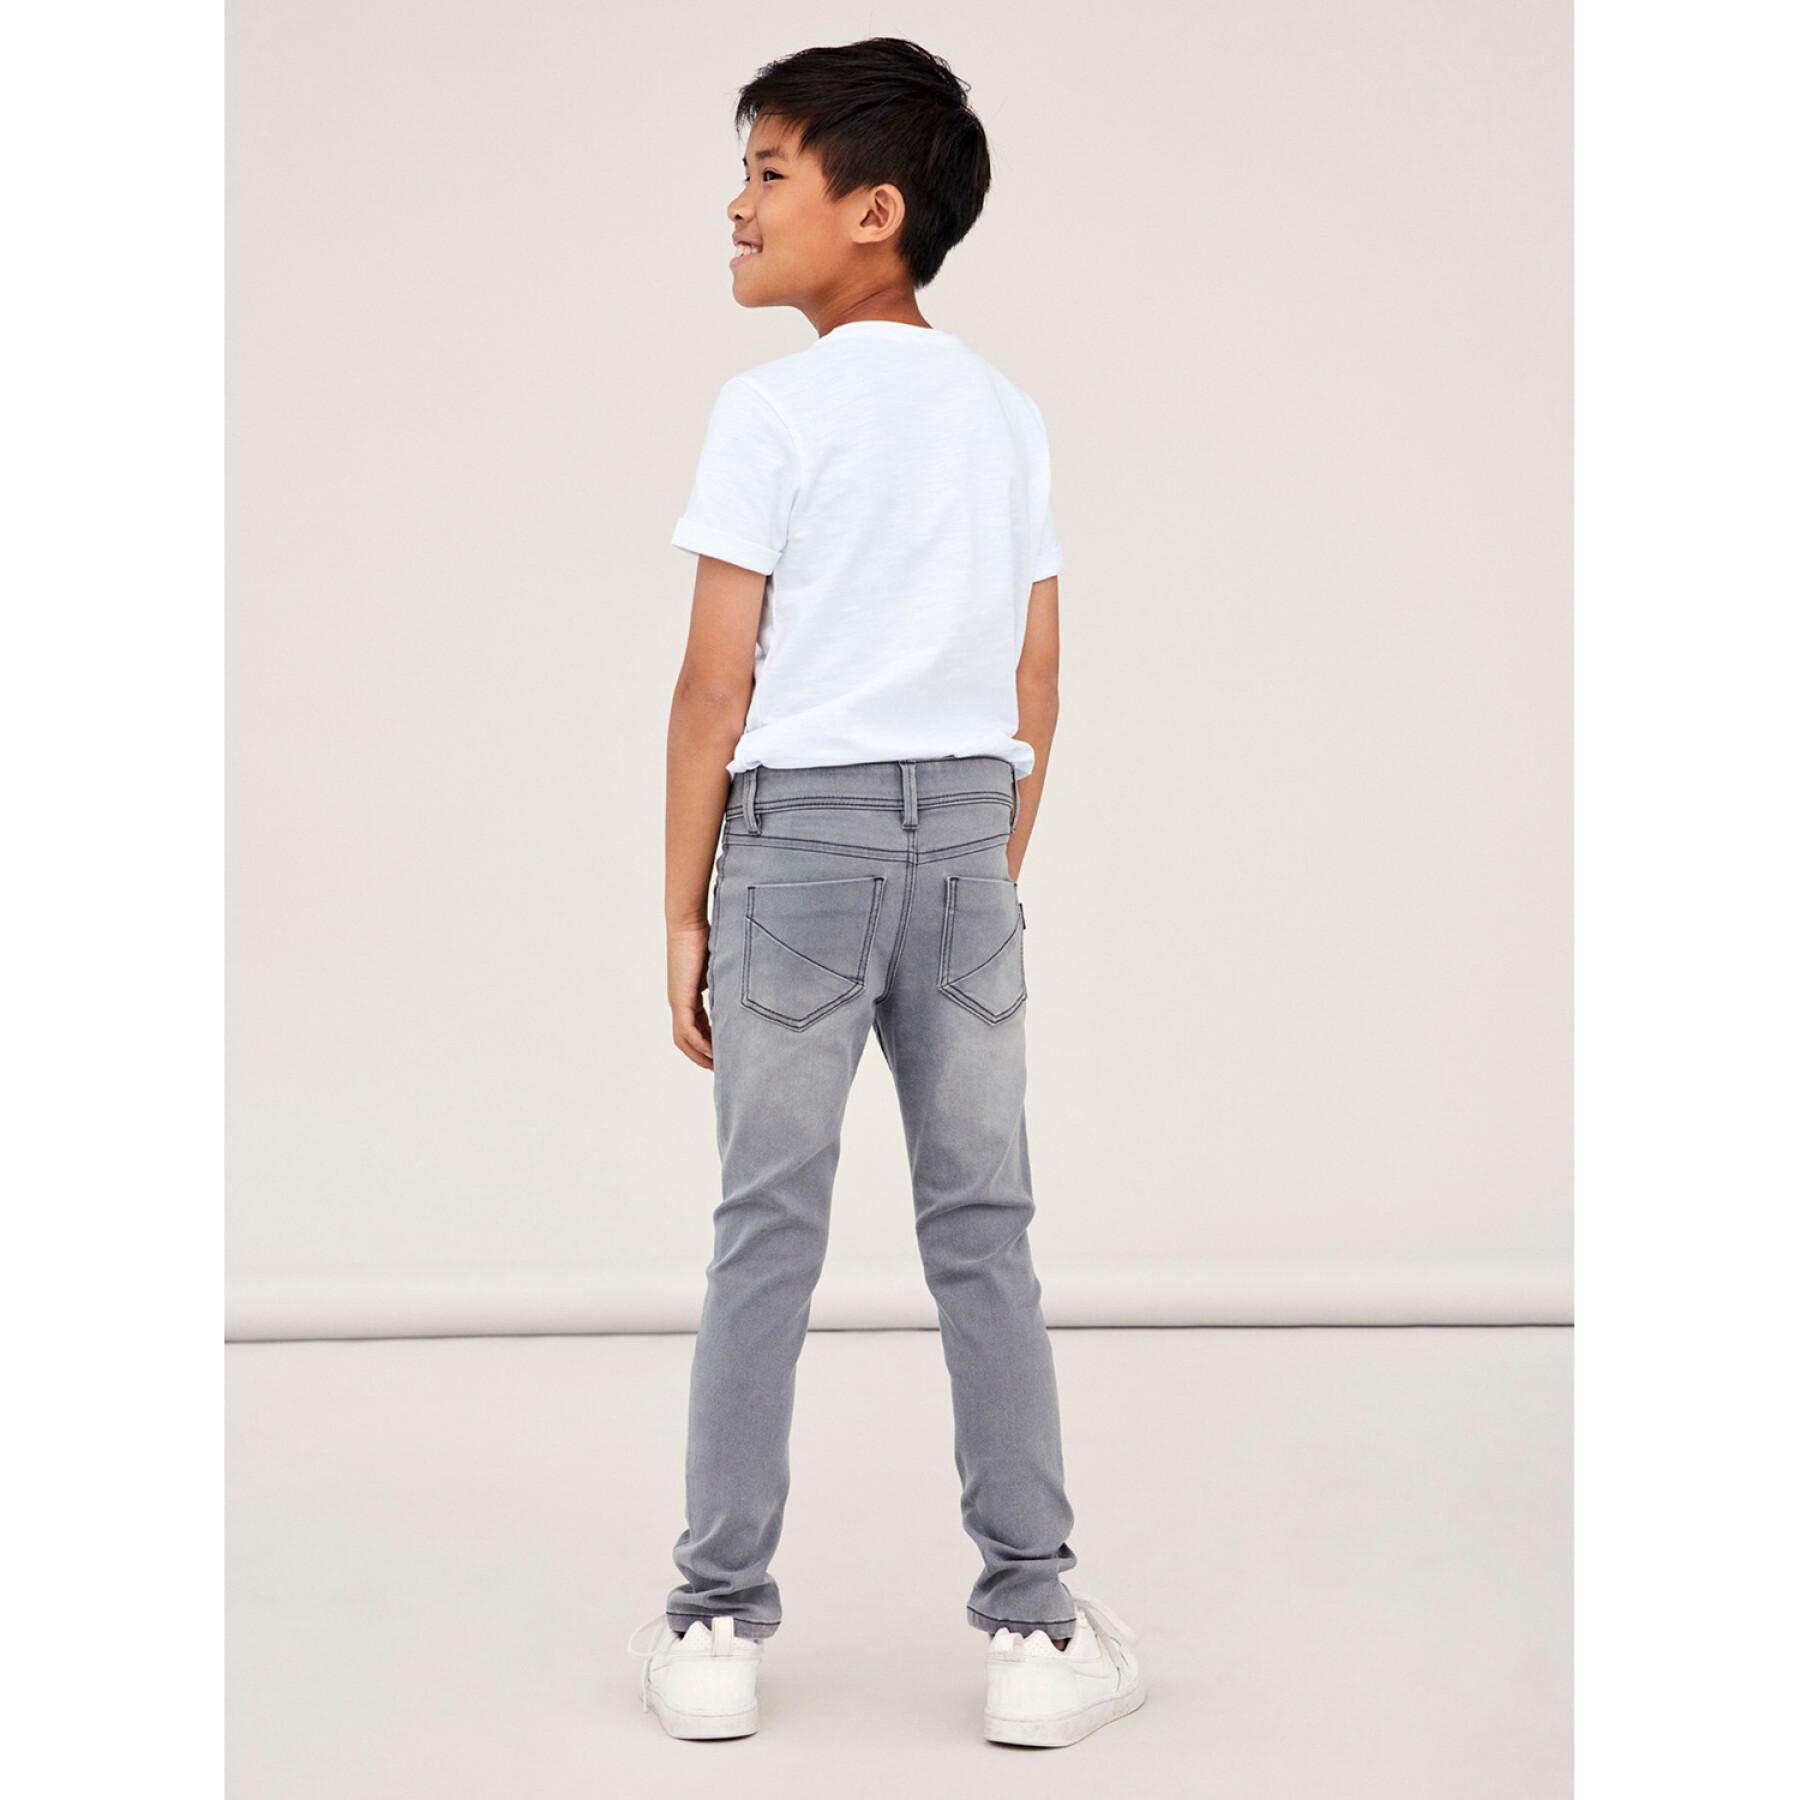 Children's jeans Name it Silas Tax